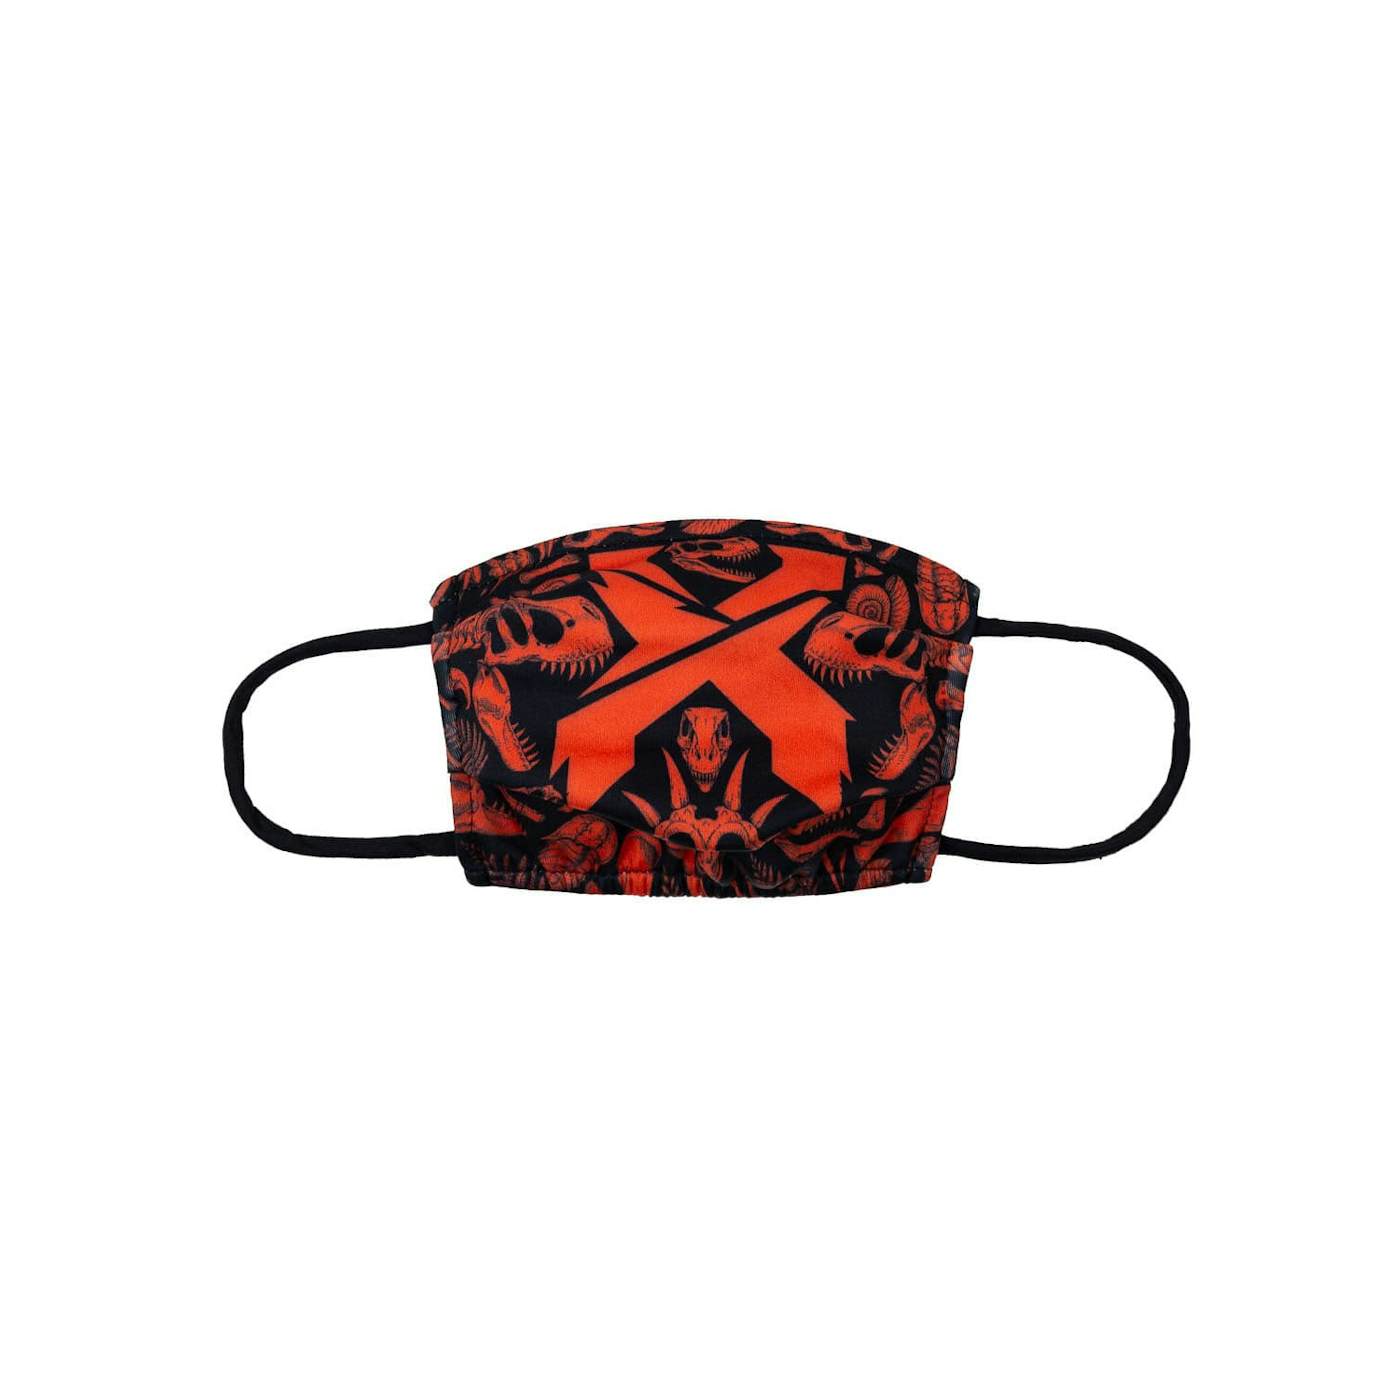 Excision 'Fossil Rex' Face Mask - Red/Black